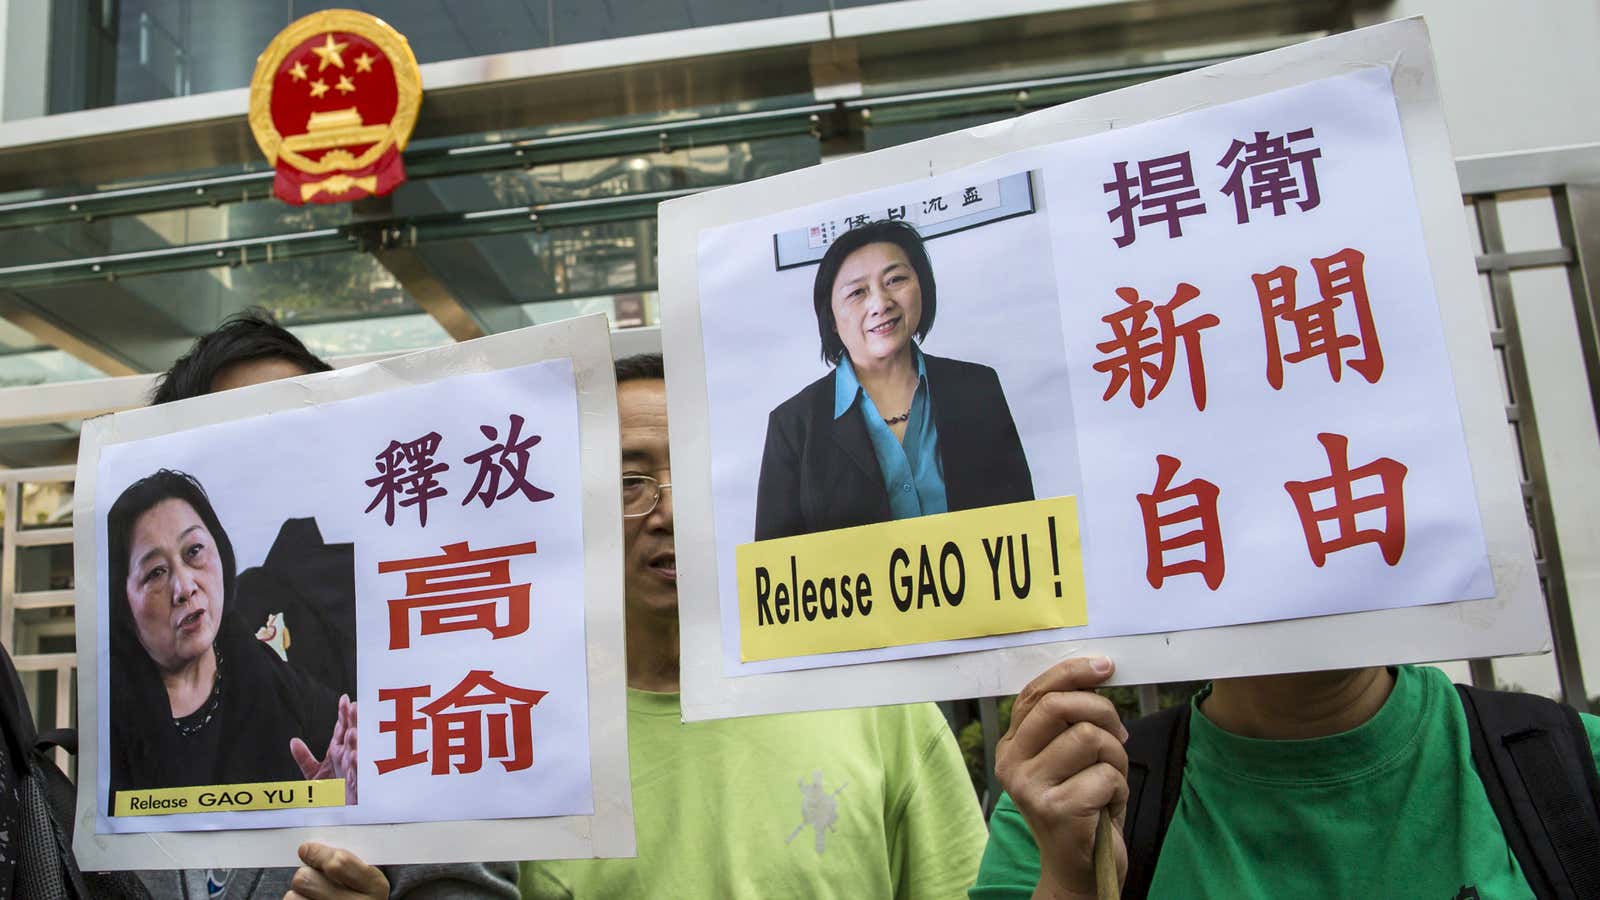 Protesters in Hong Kong demand Gao Yu’s release earlier this year.